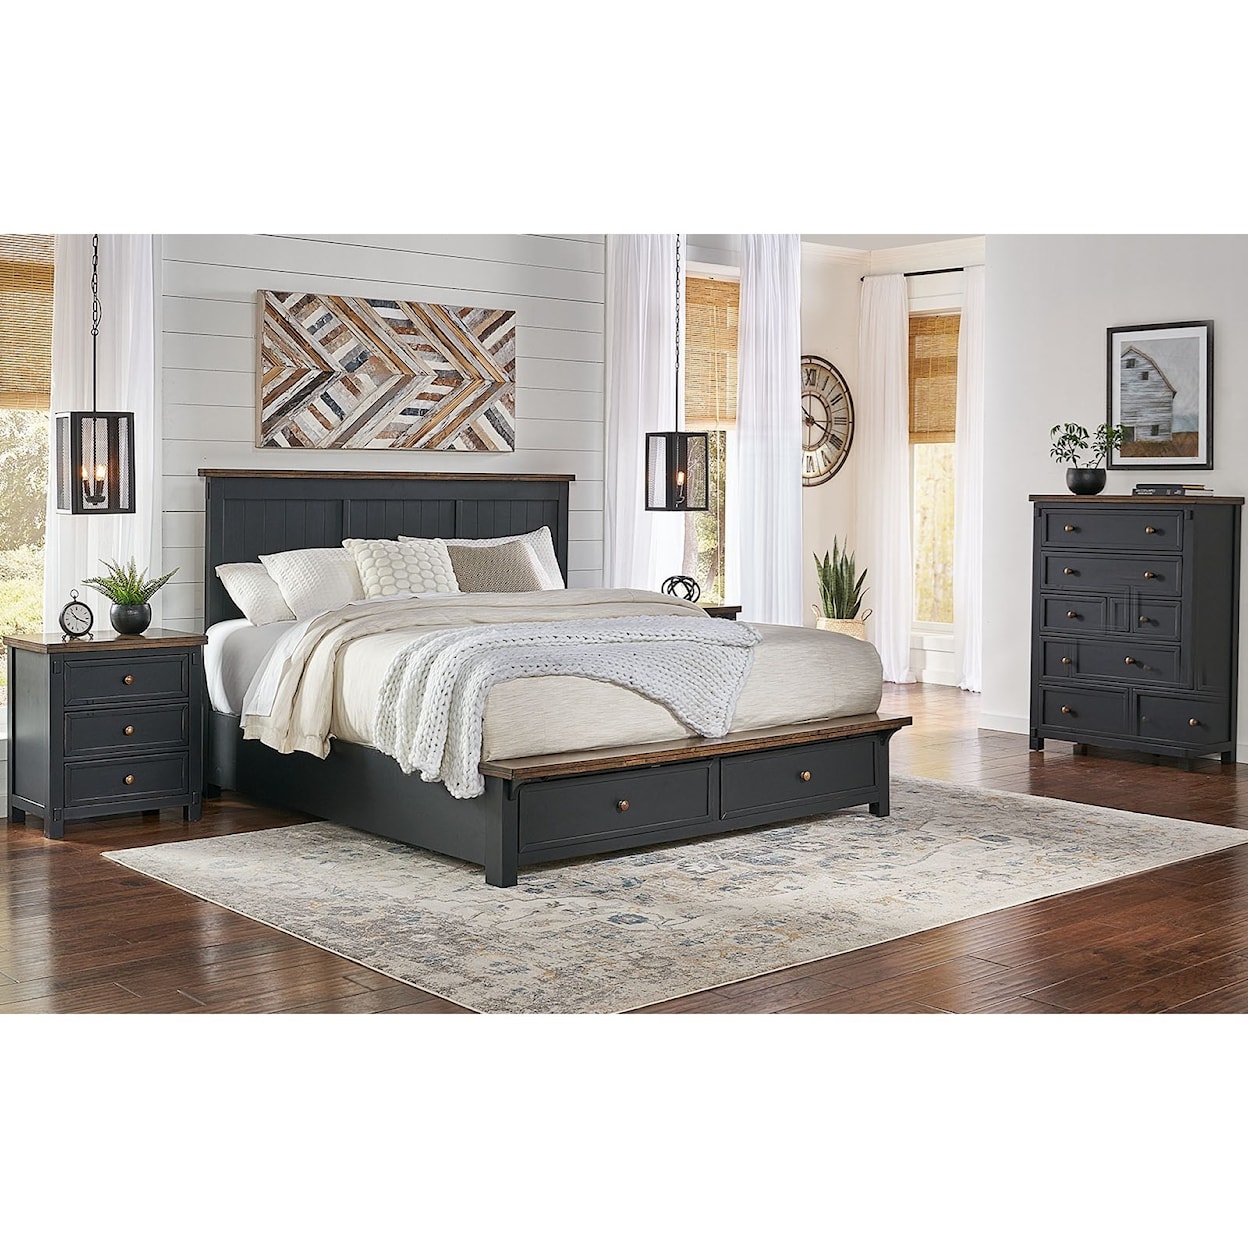 A-A Spencer California King Storage Bed